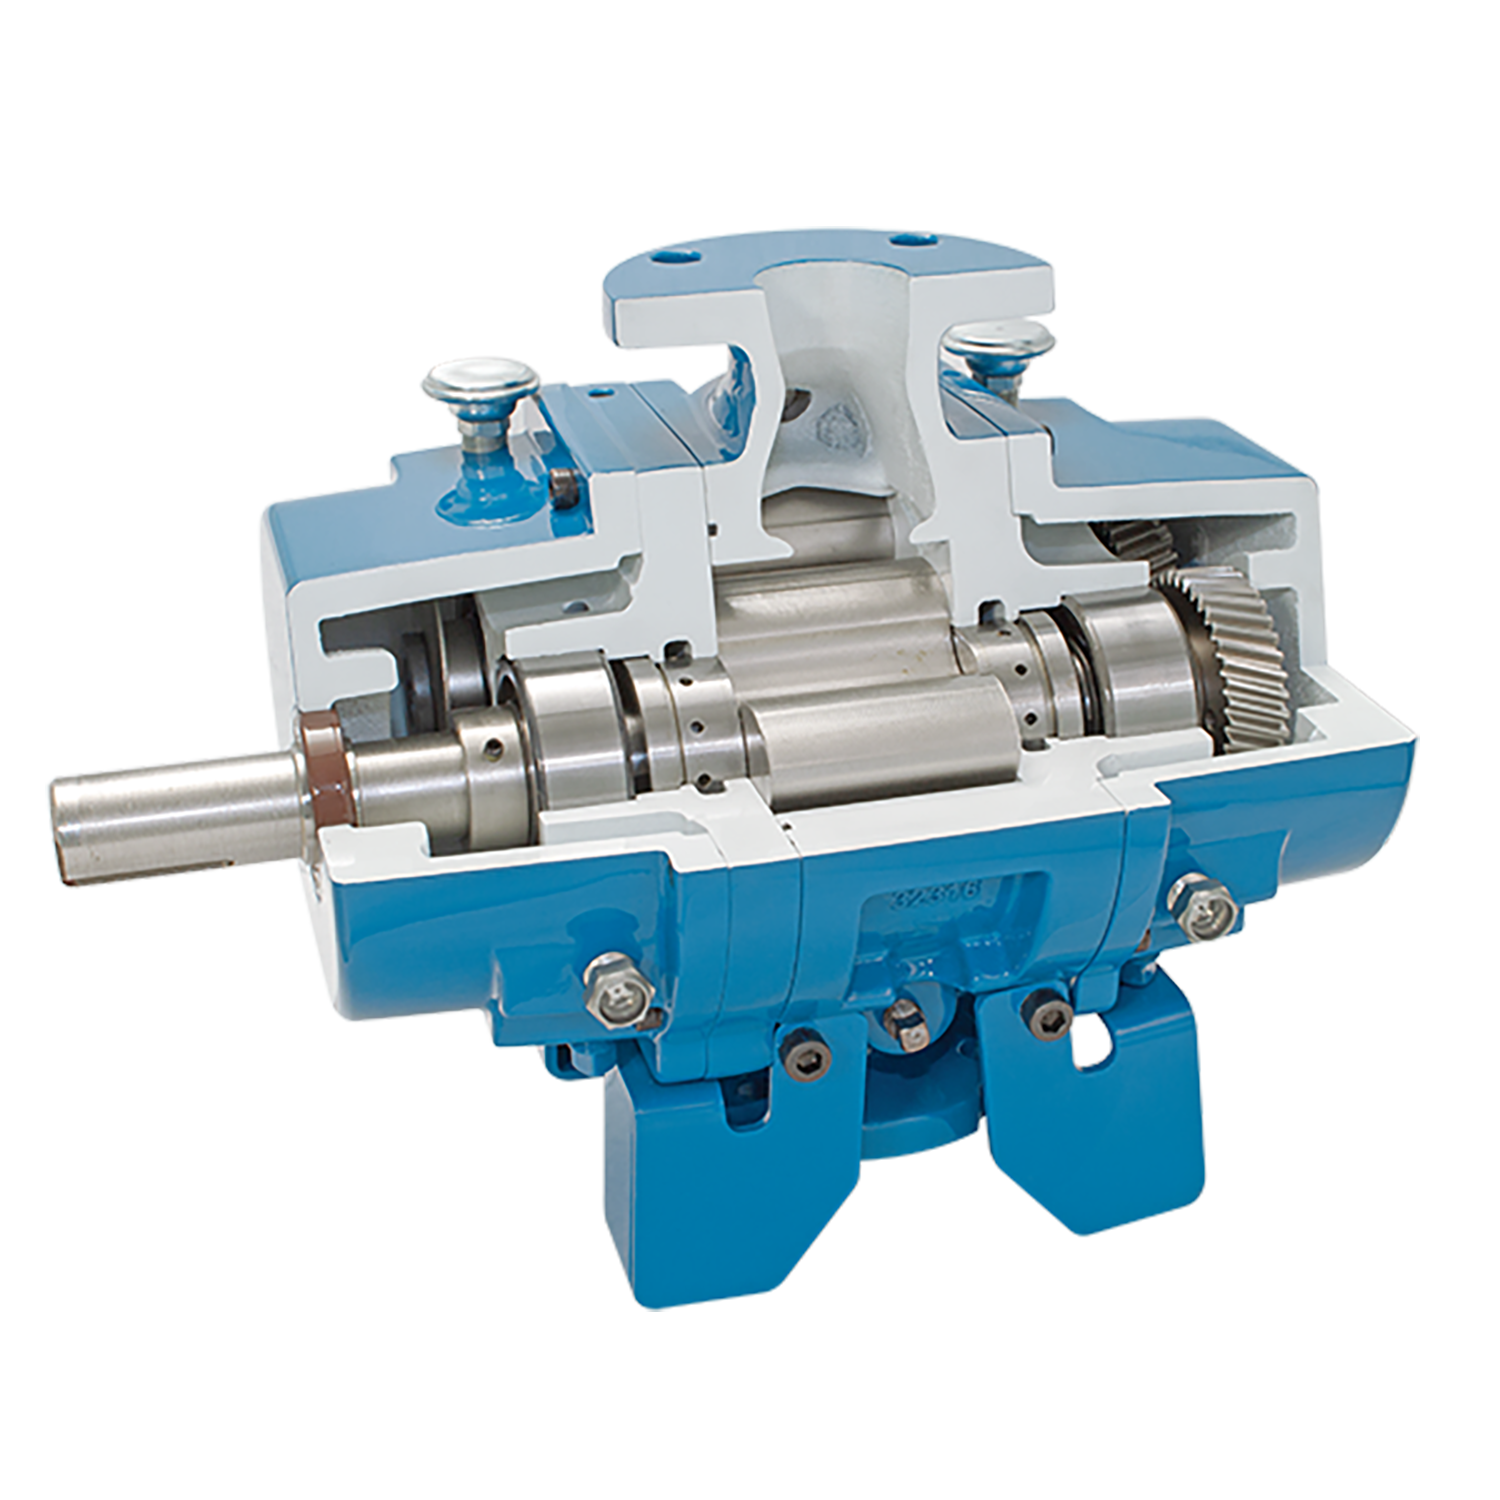 MD-Pneumatics - Qx Series Rotary Positive Displacement Blowers